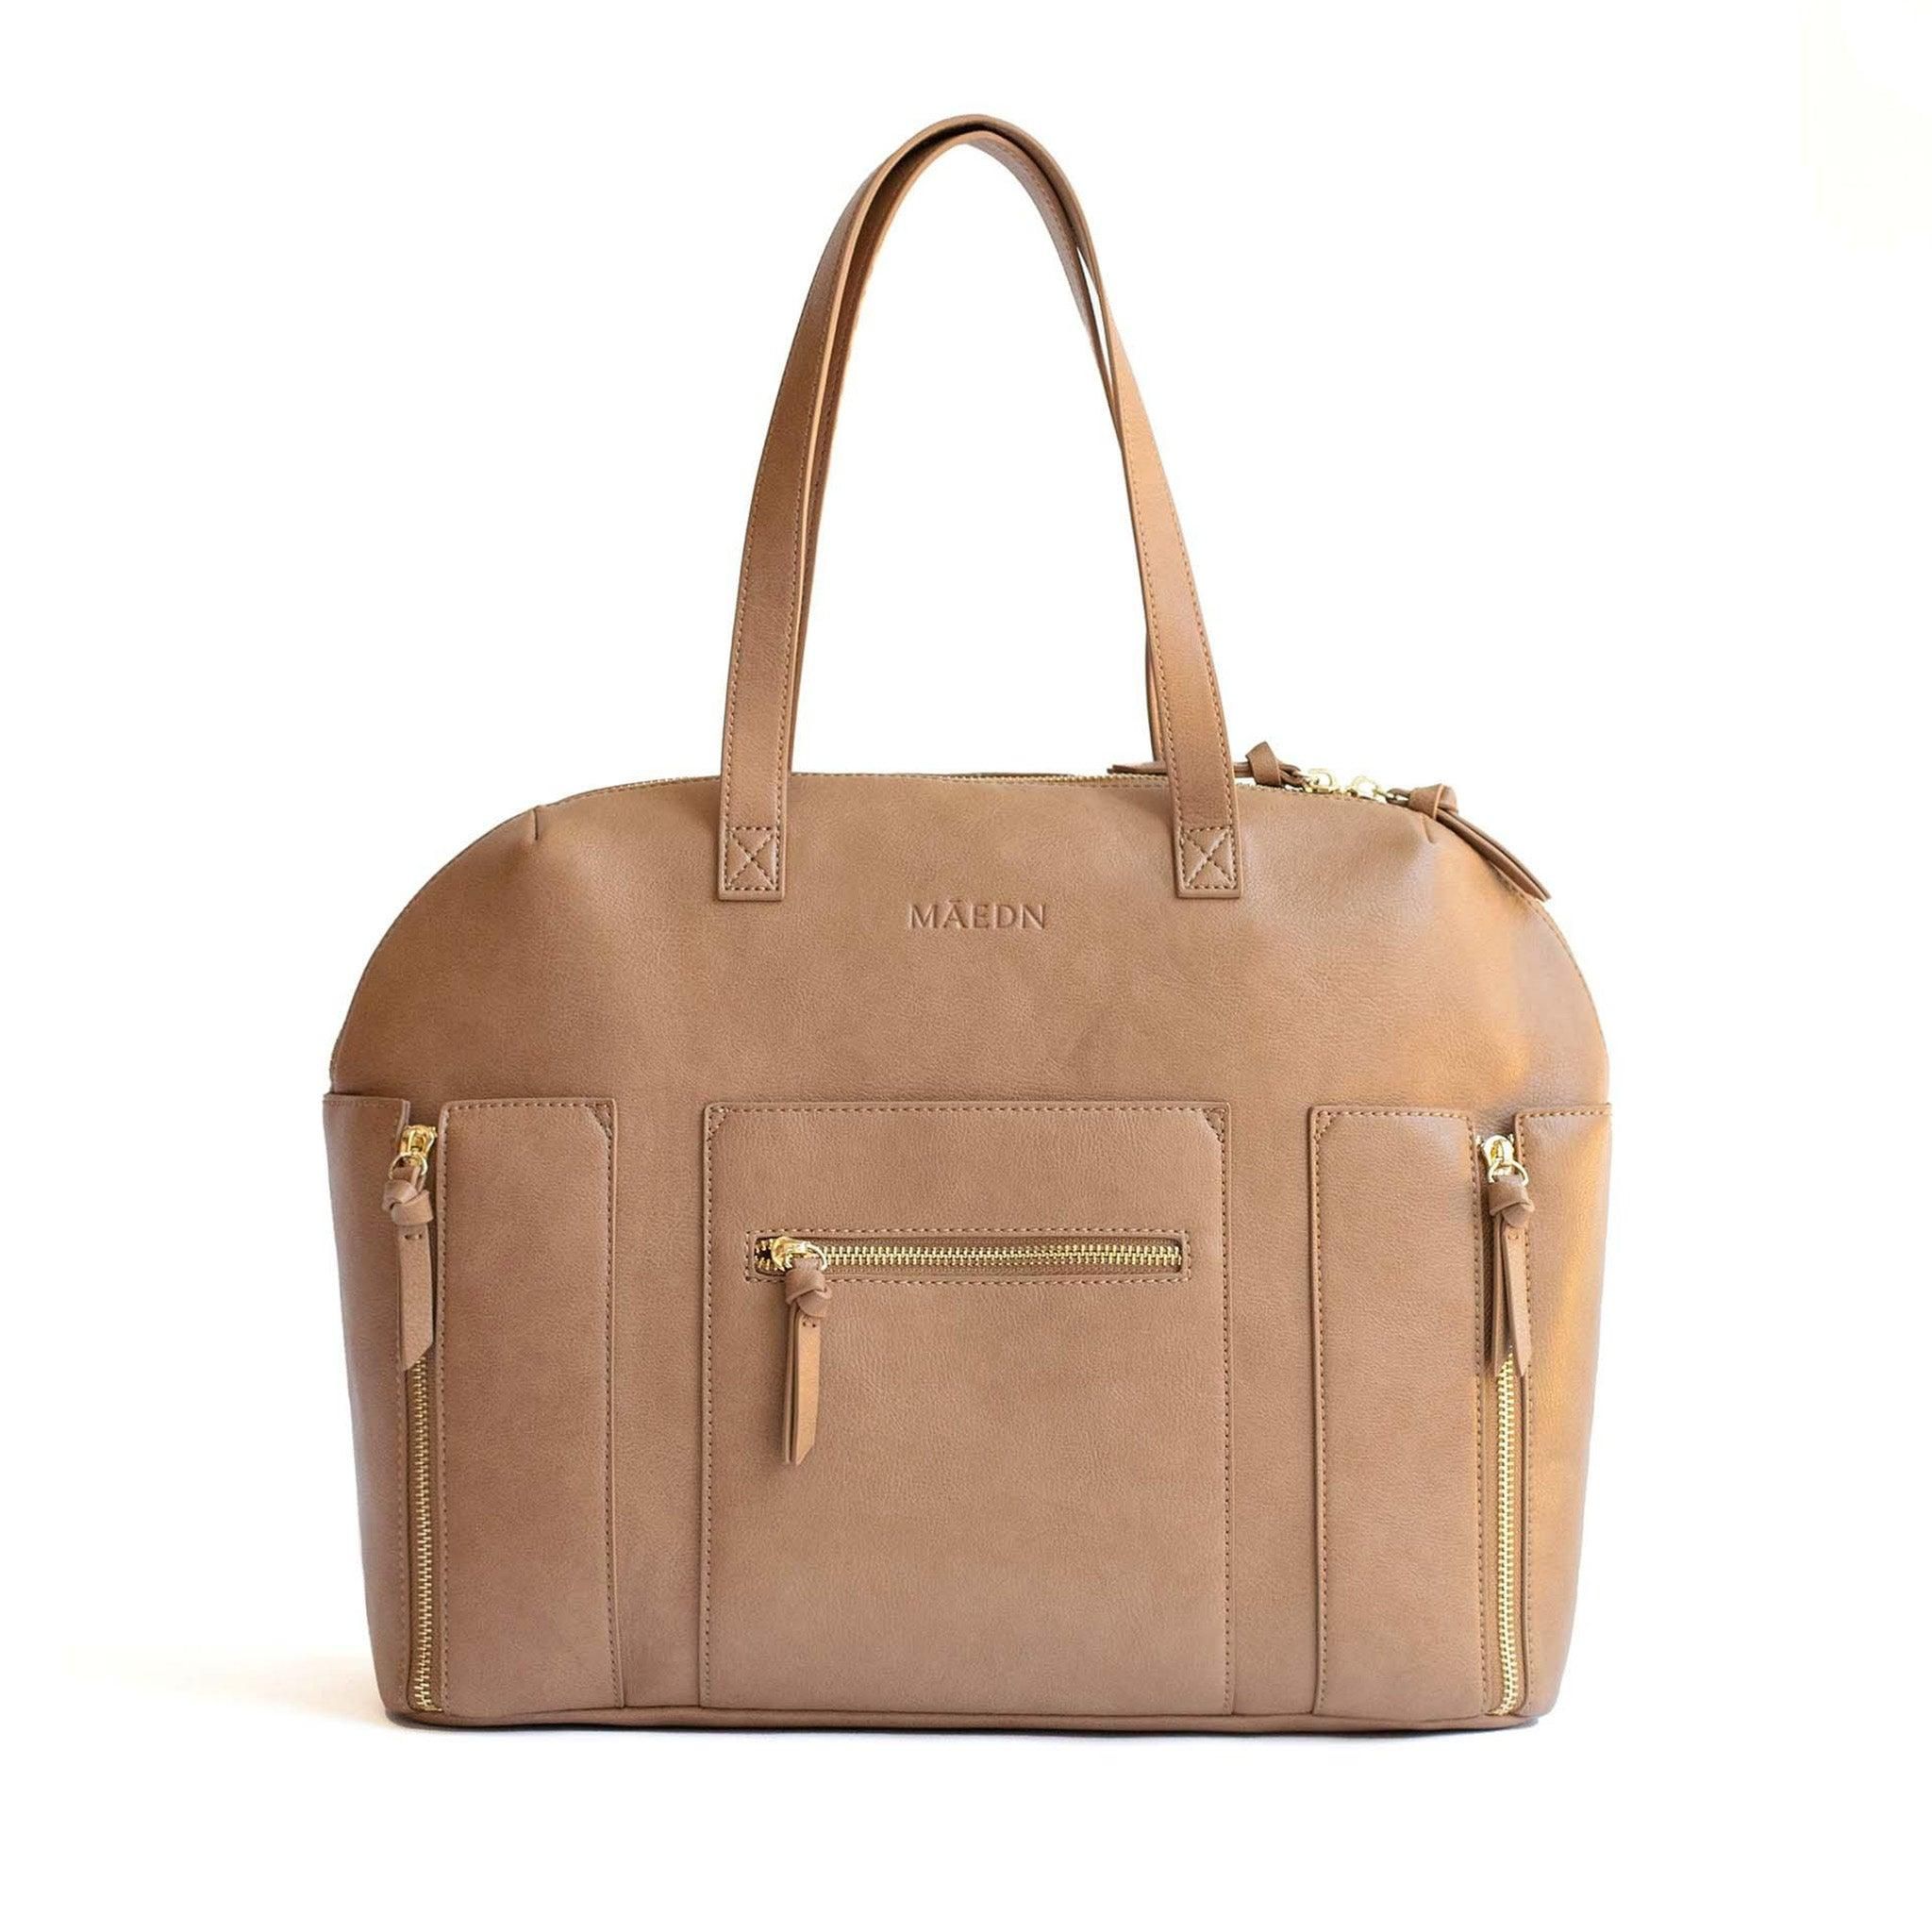 Camel Carryall Convertible Tote | Maedn